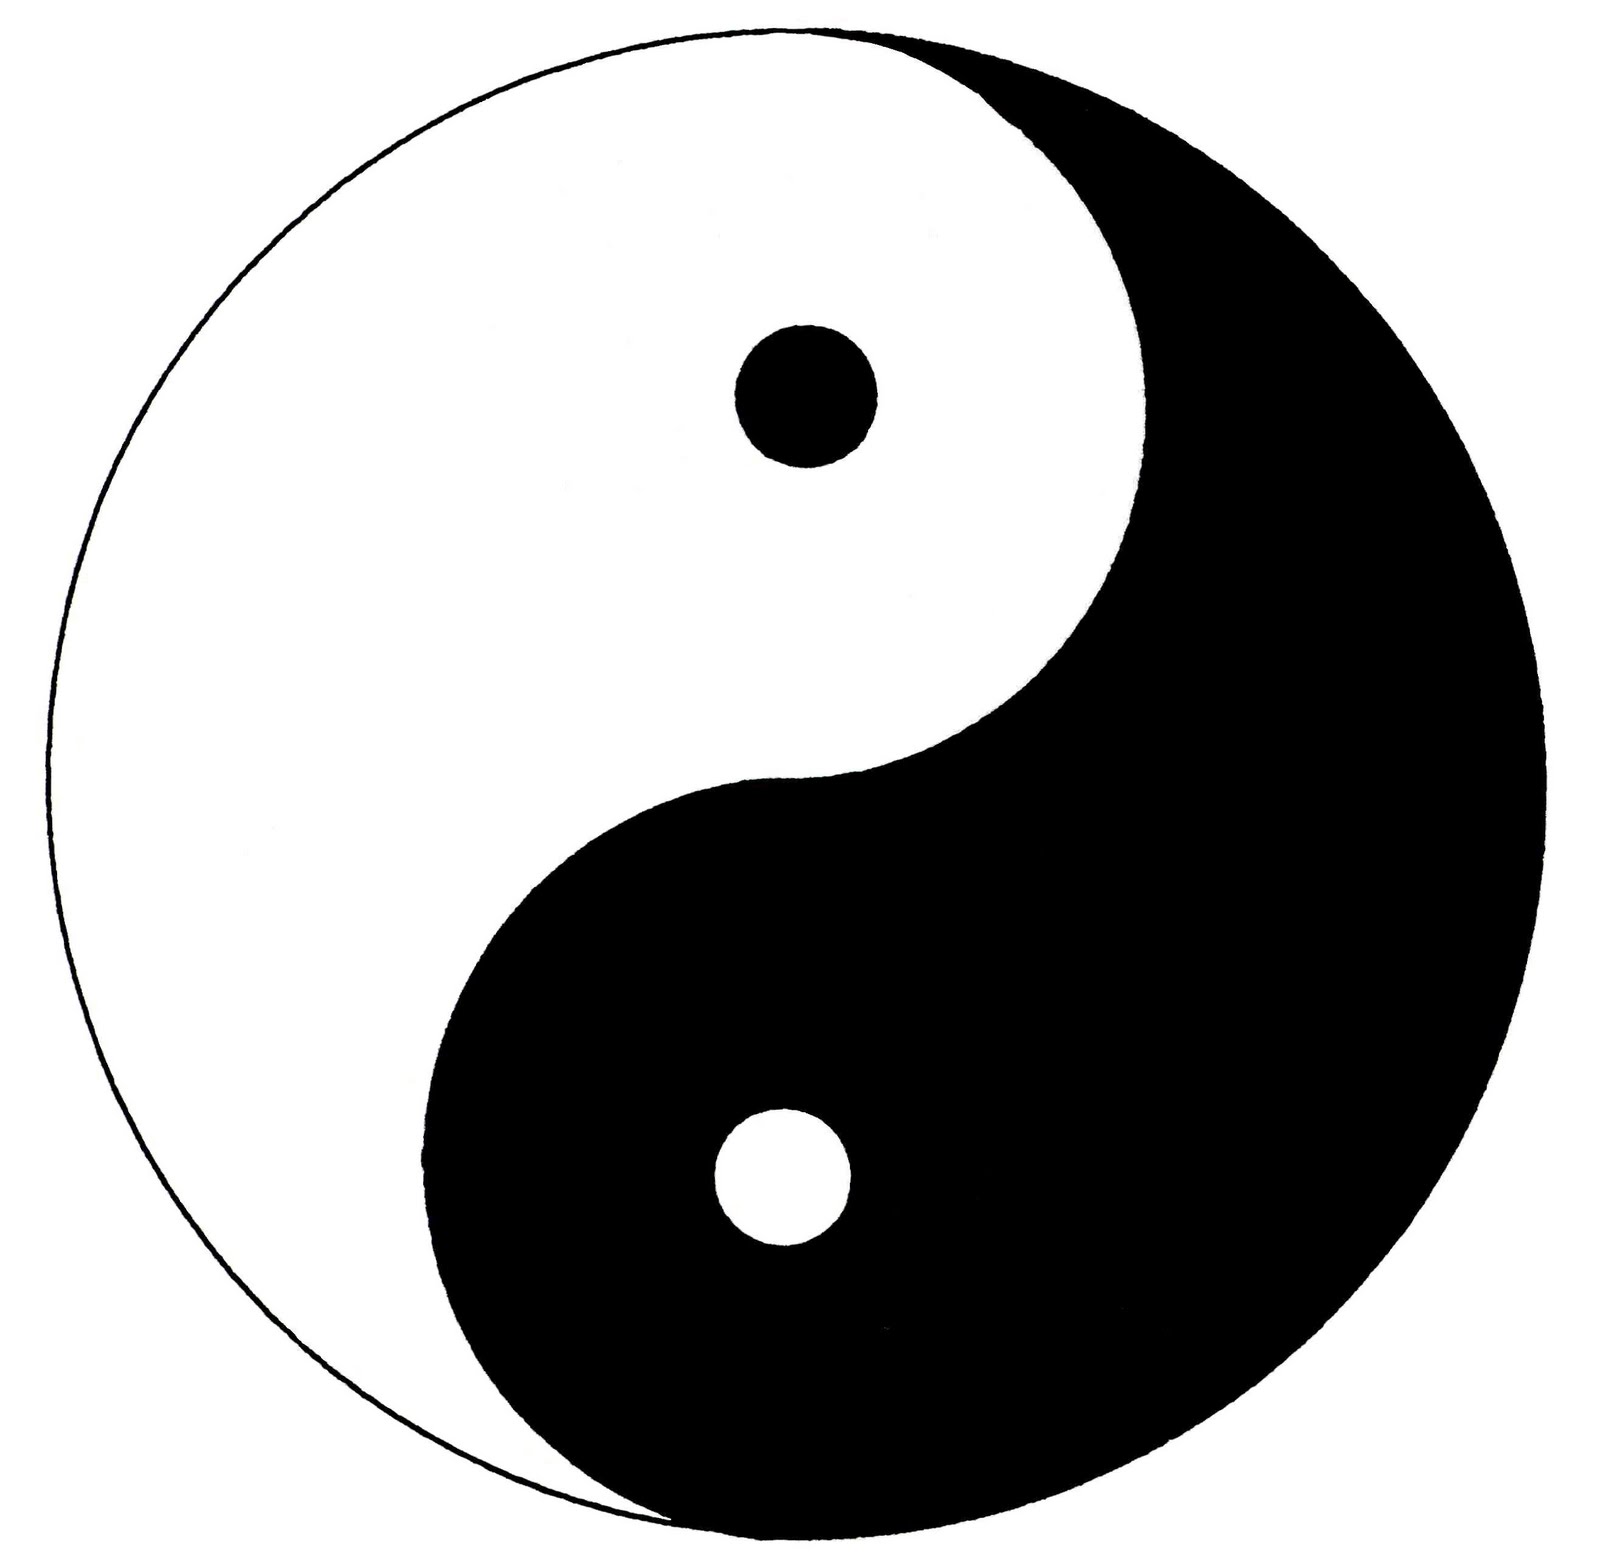 Merely His: The Ying Yang of Life